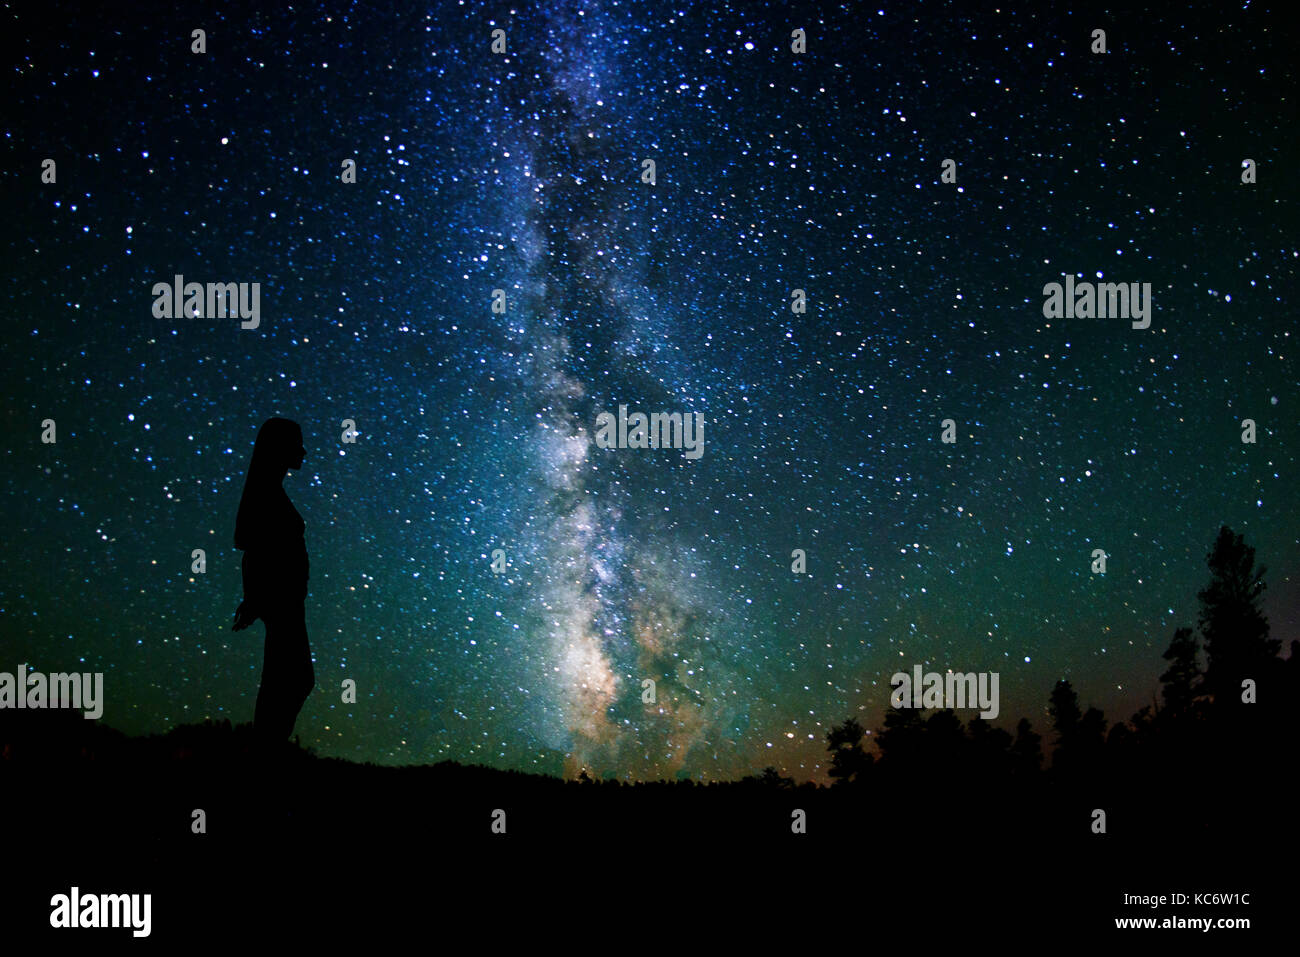 Silhouette of woman against Milky Way Stock Photo